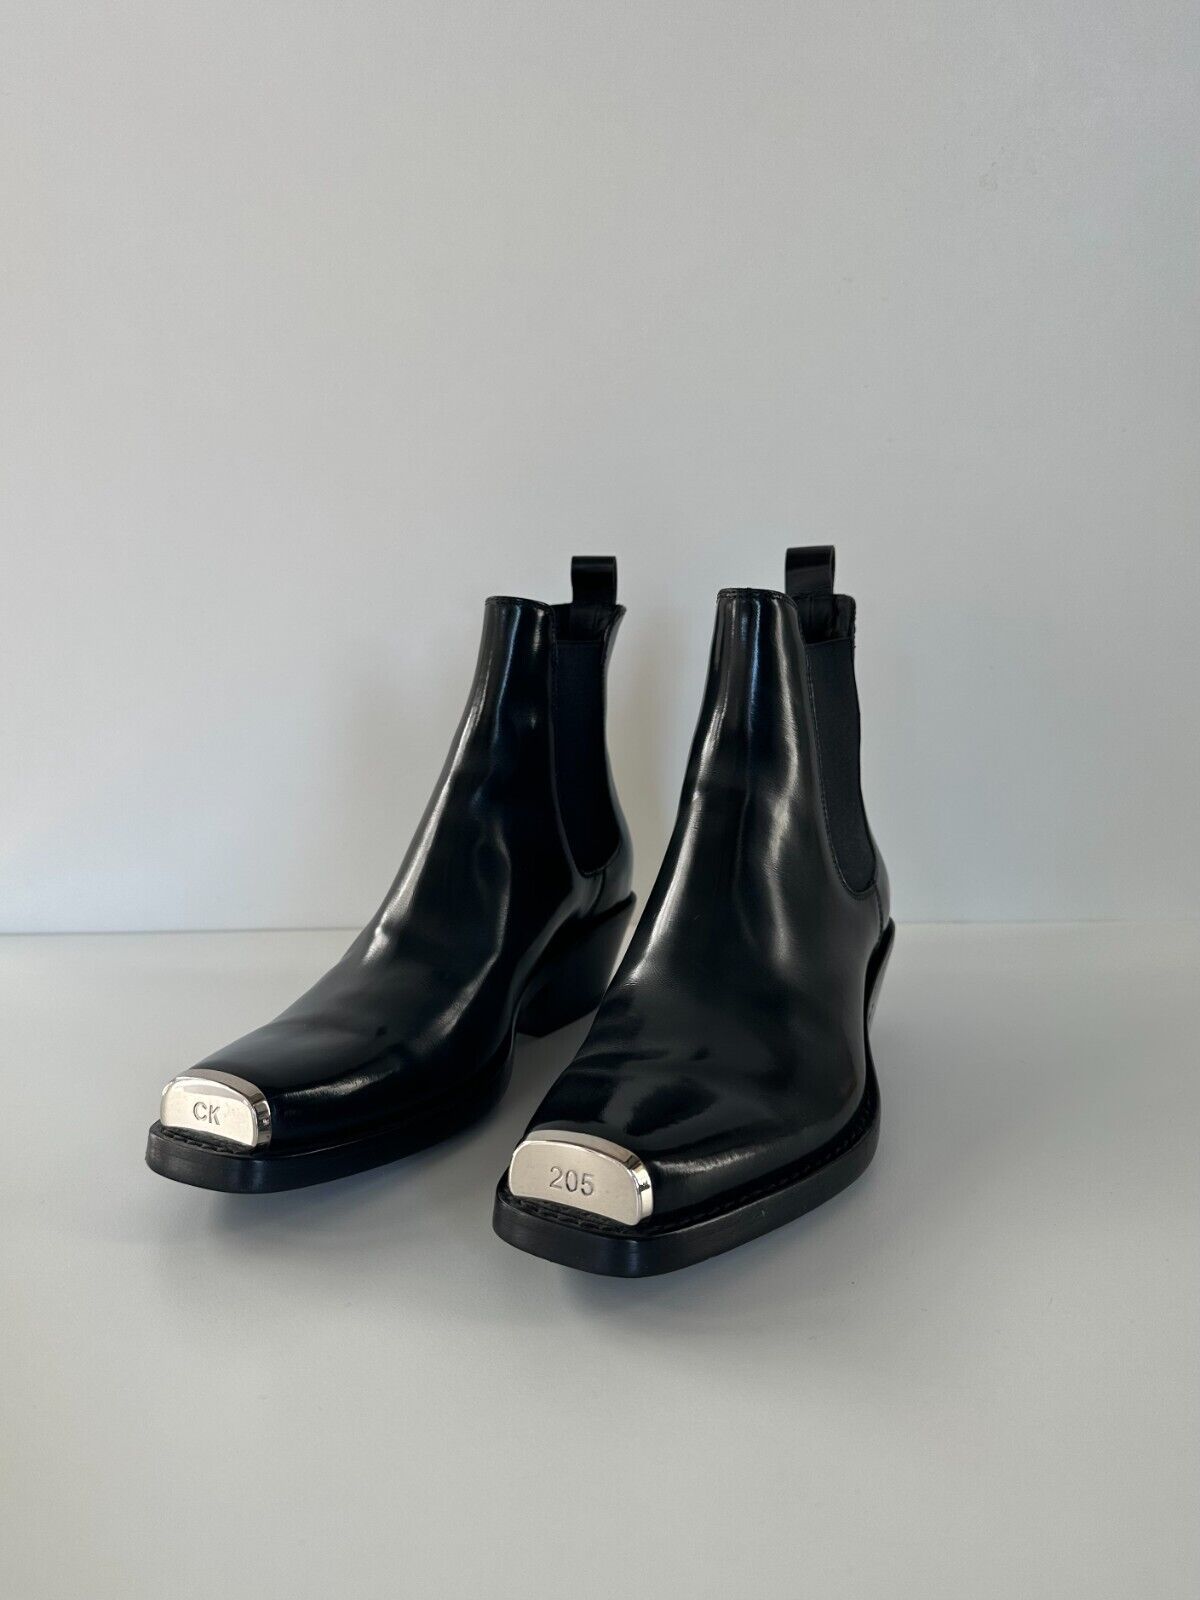 Raf Simons for Calvin Klein 205w39nyc Leather Chelsea Boots Black size 38 |  eBay